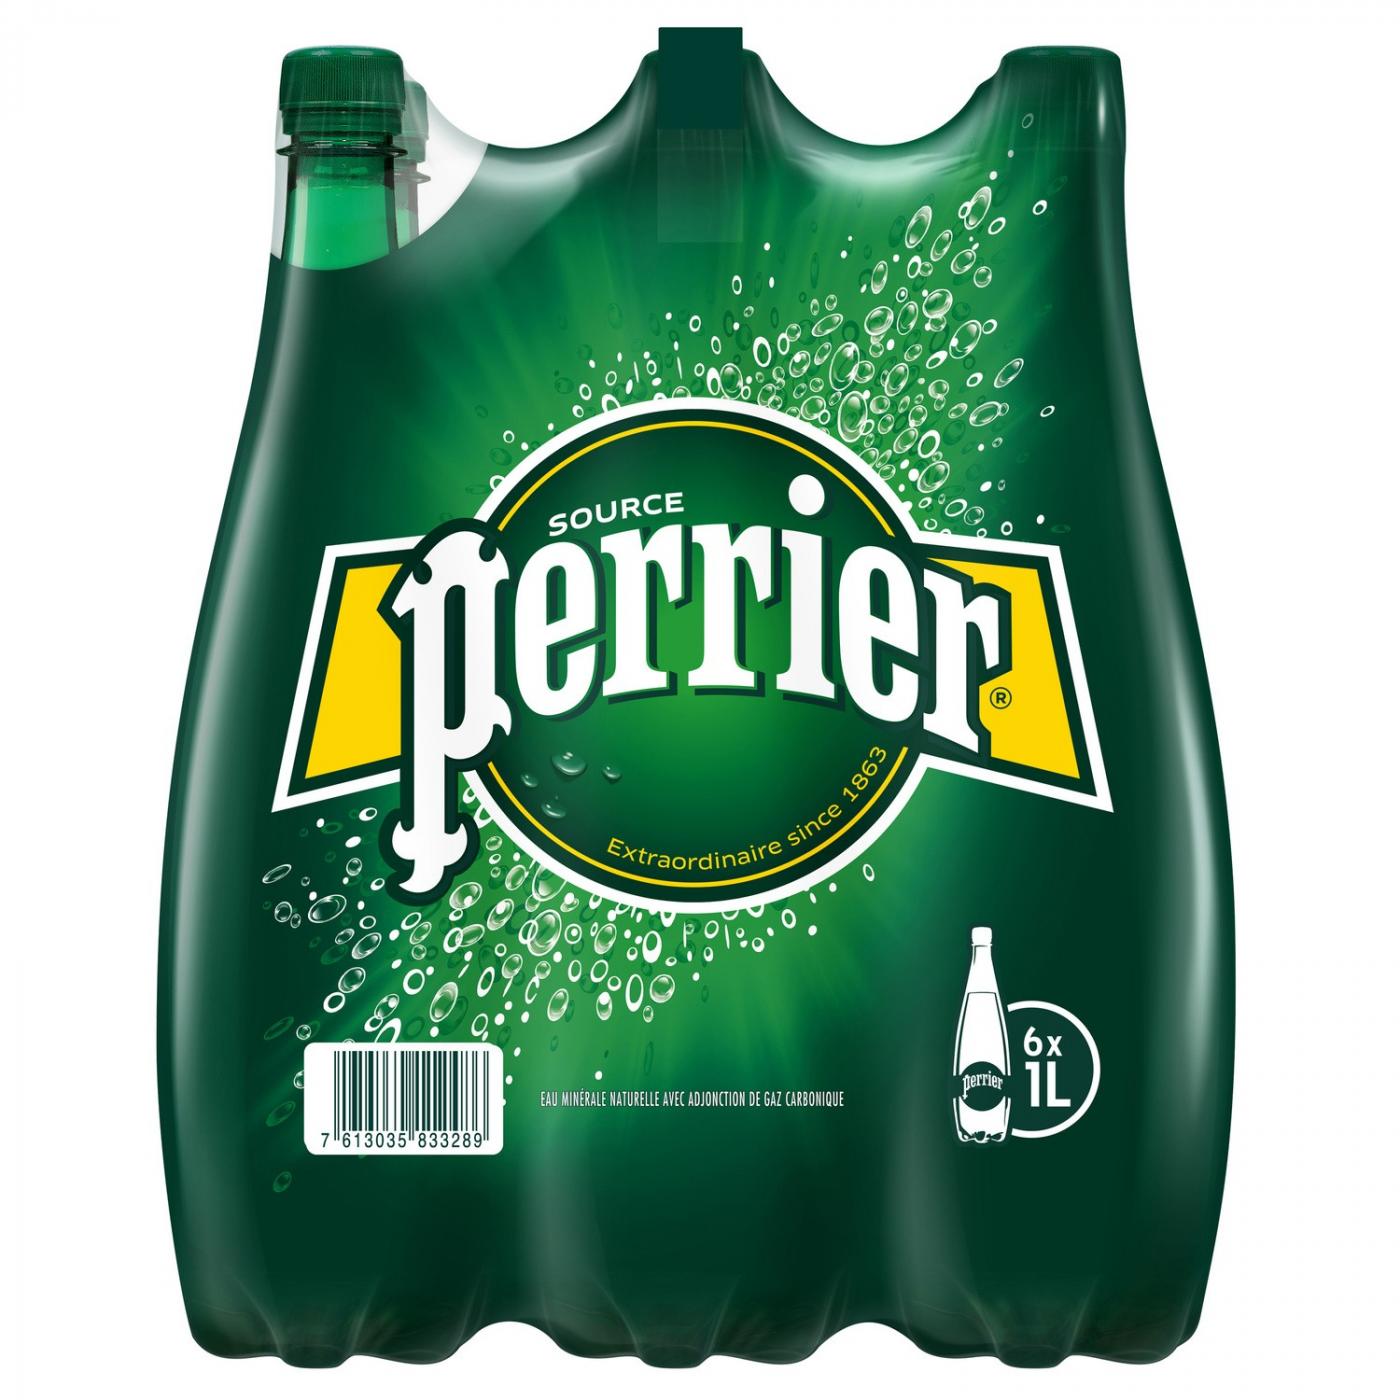 Perrier Bouteilel 6x 1L